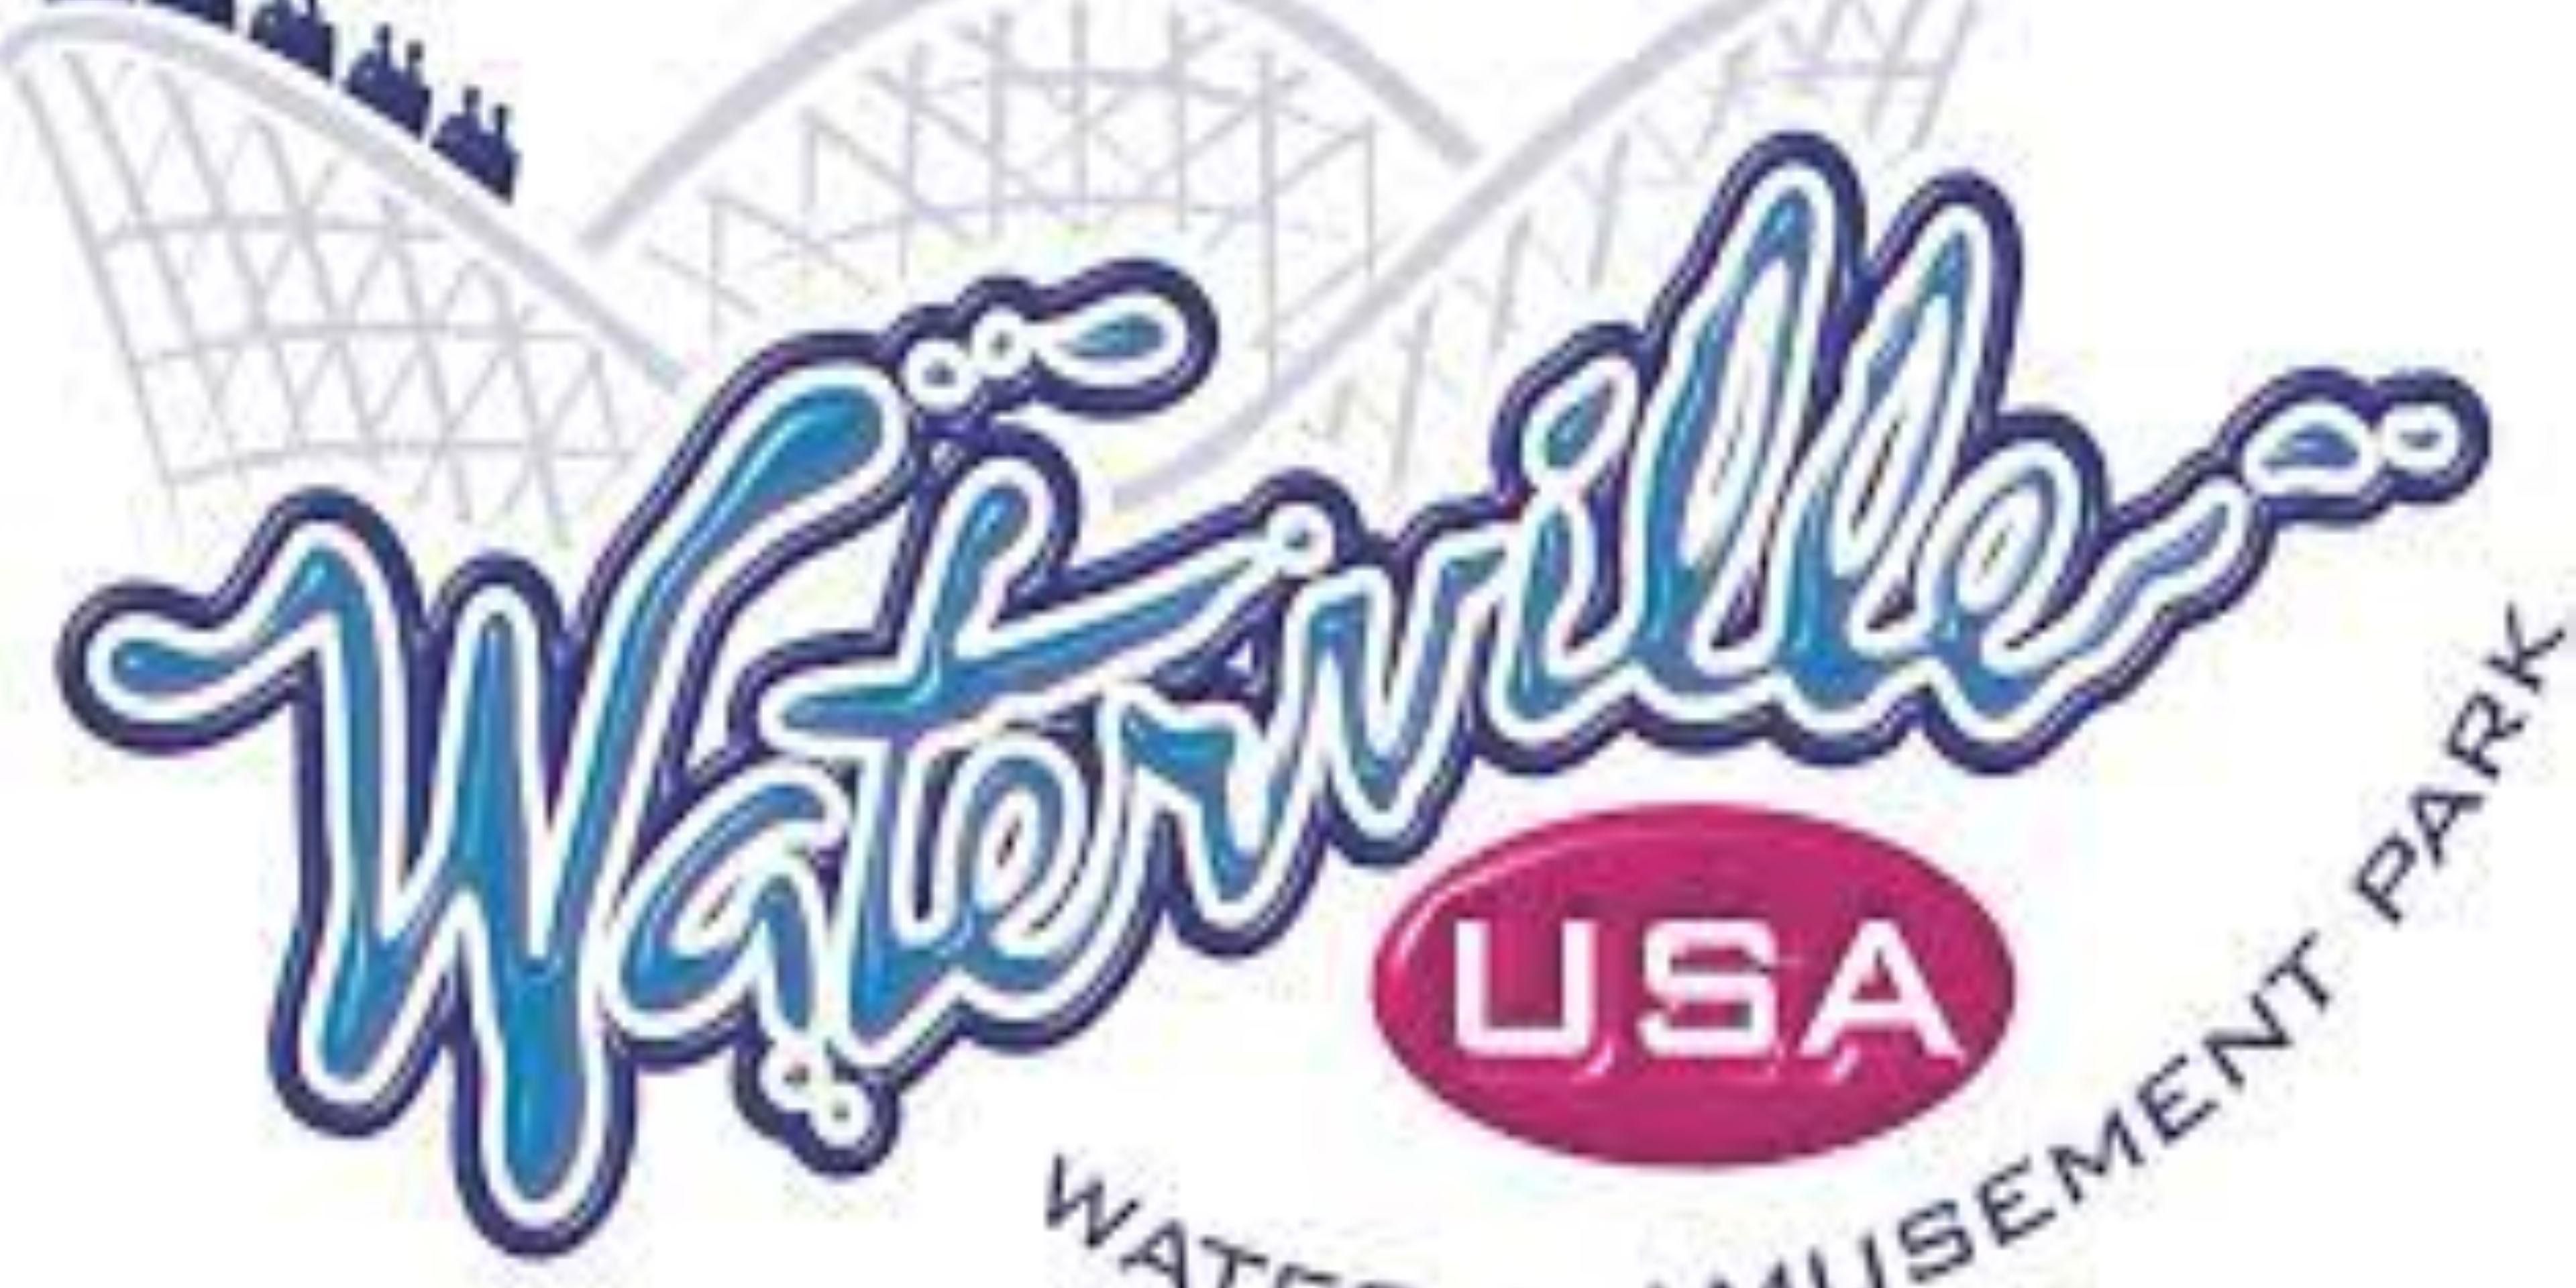 Waterville USA offers you 20-acres of fun through our waterpark, amusement park and escape rooms. Located just 1/4 mile from the beach, we are in the heart of the resort community of Gulf Shores, Alabama. At Waterville USA, we are committed to your experience and that’s what keeps families coming back day after day, year after year, since 1986.